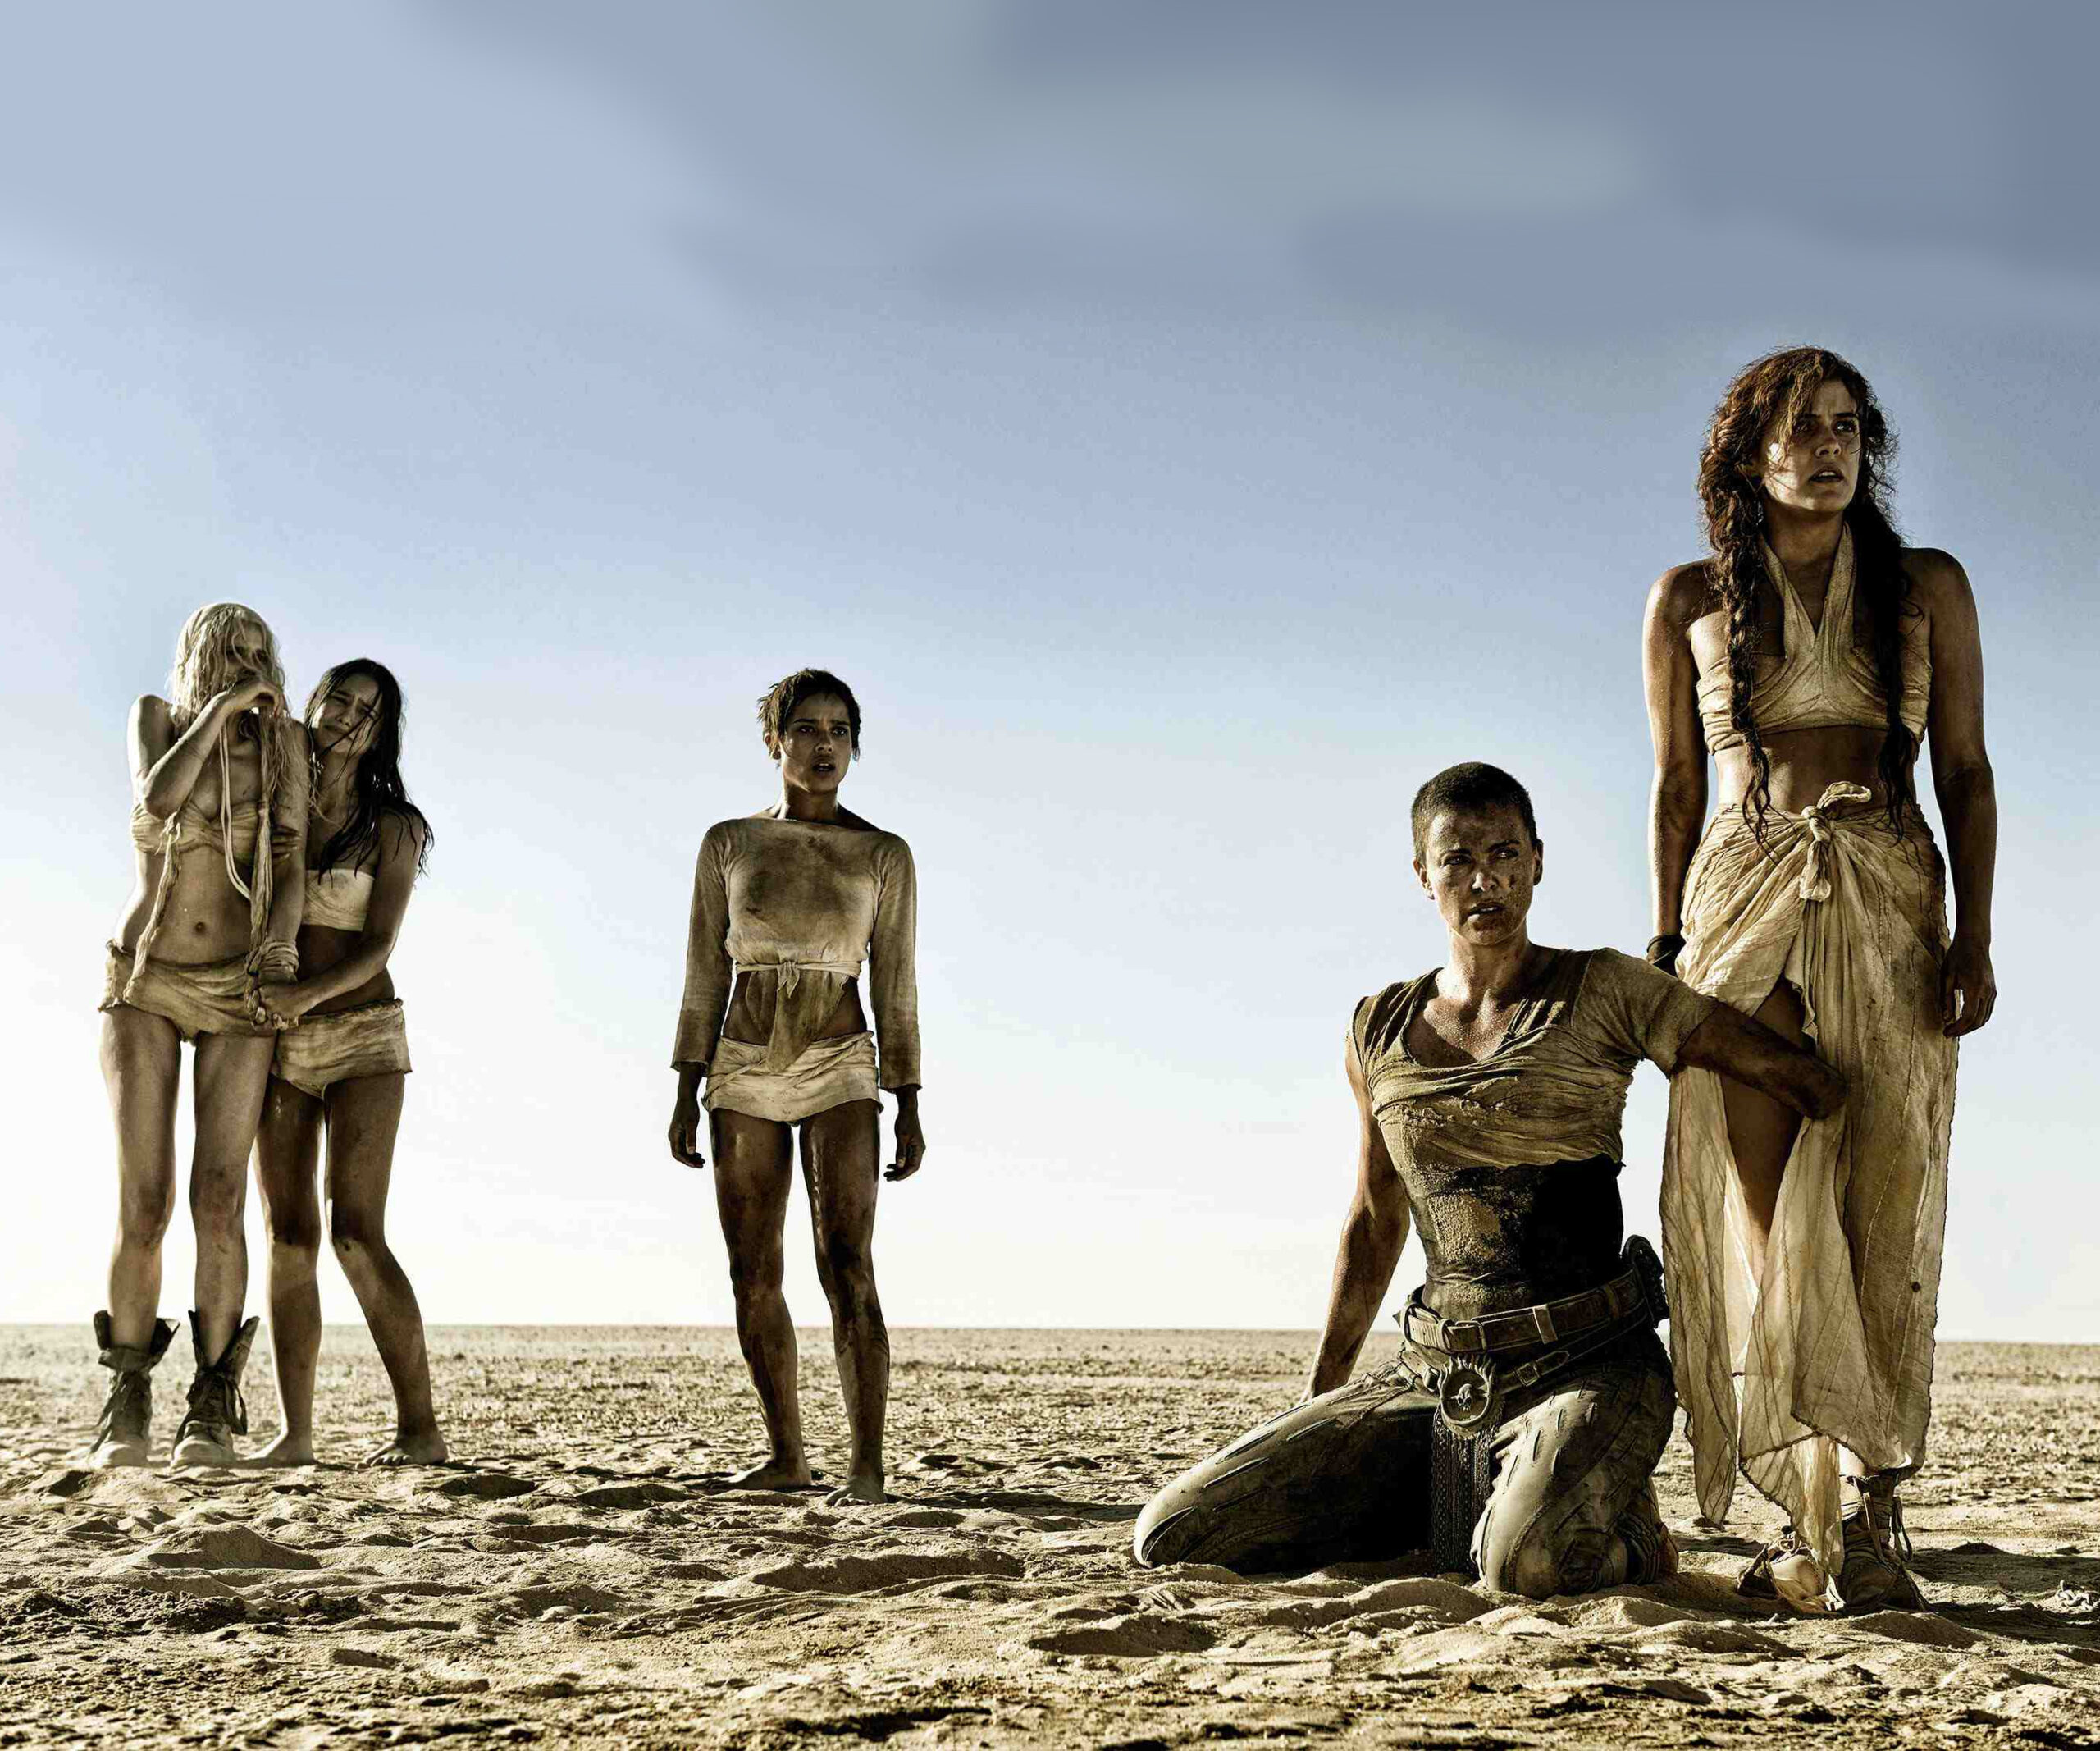 OPINION: Is Mad Max feminist?